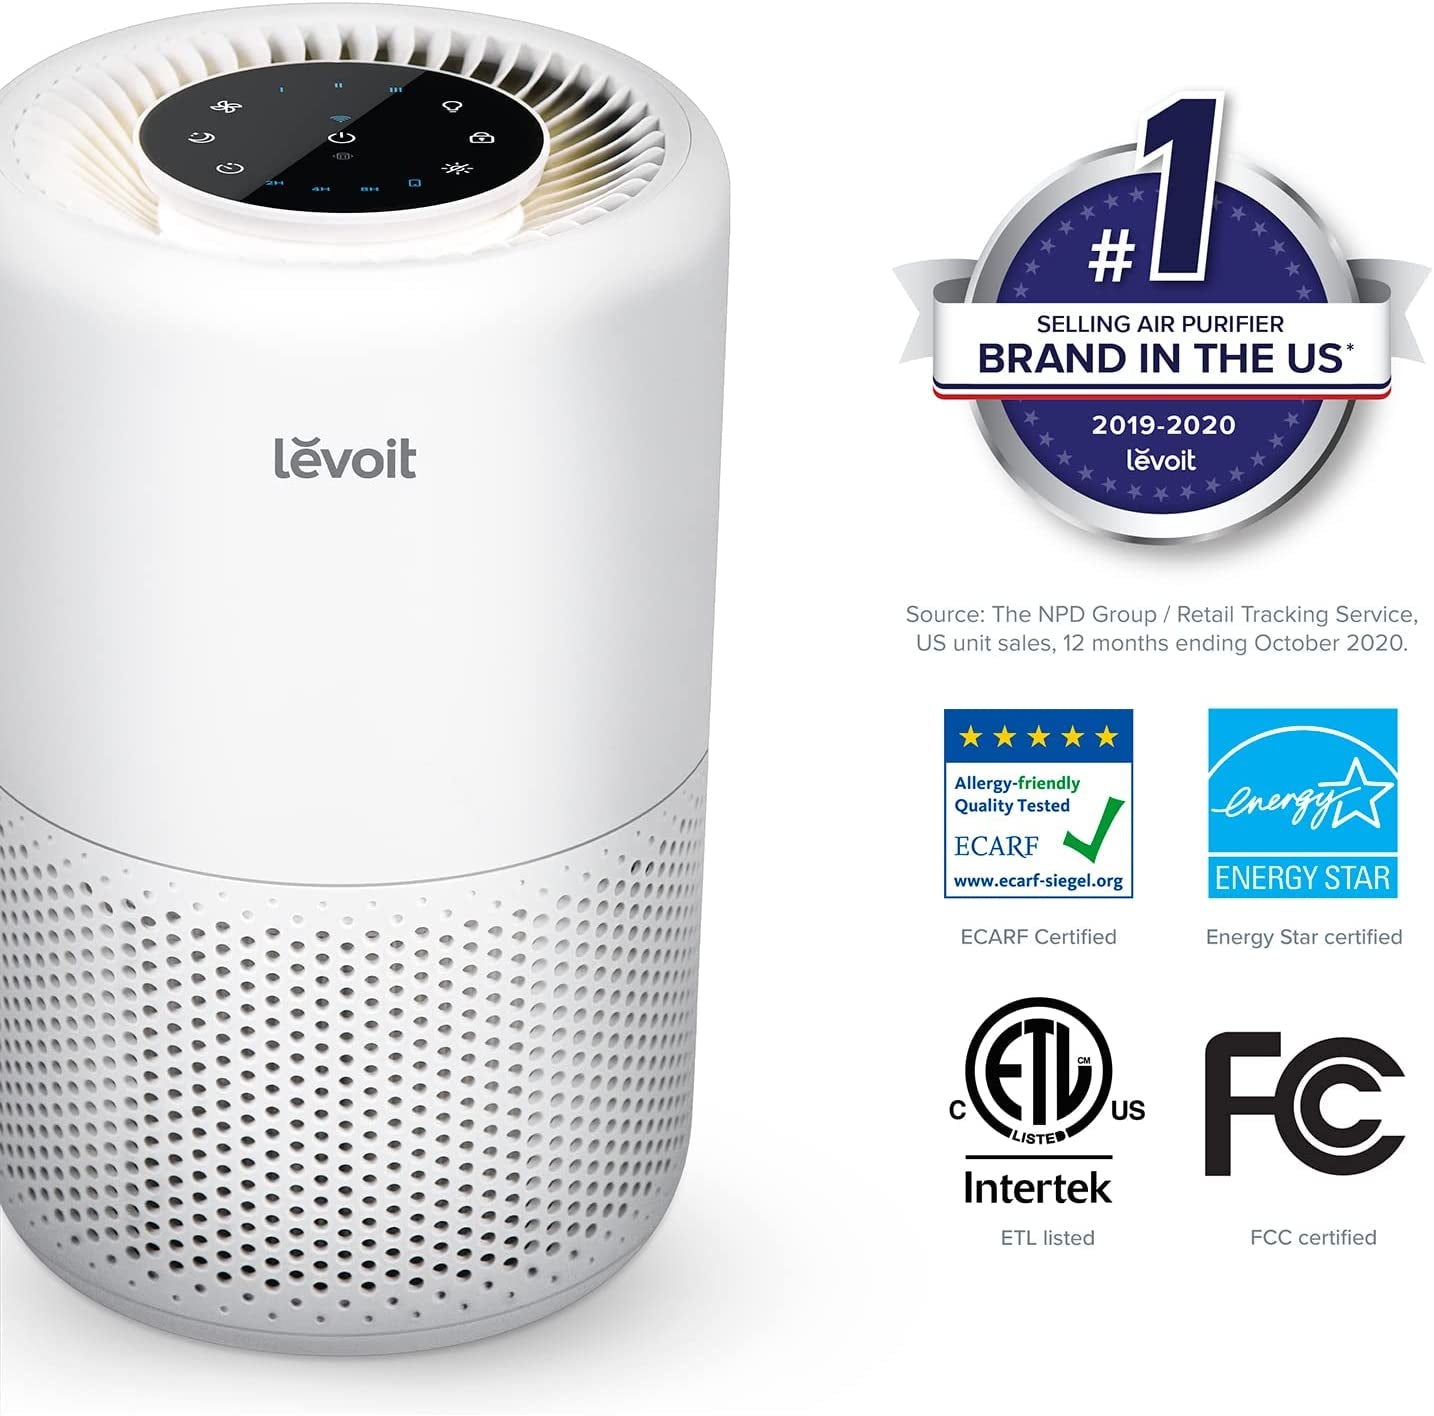 Levoit, LEVOIT Smart Wifi Air Purifier for Home, Alexa Enabled H13 True HEPA Filter for Allergies, Pets, Smokers, Smoke, Dust, Pollen, 24Db Quiet Air Cleaner for Bedroom with Display off Design, Core 200S